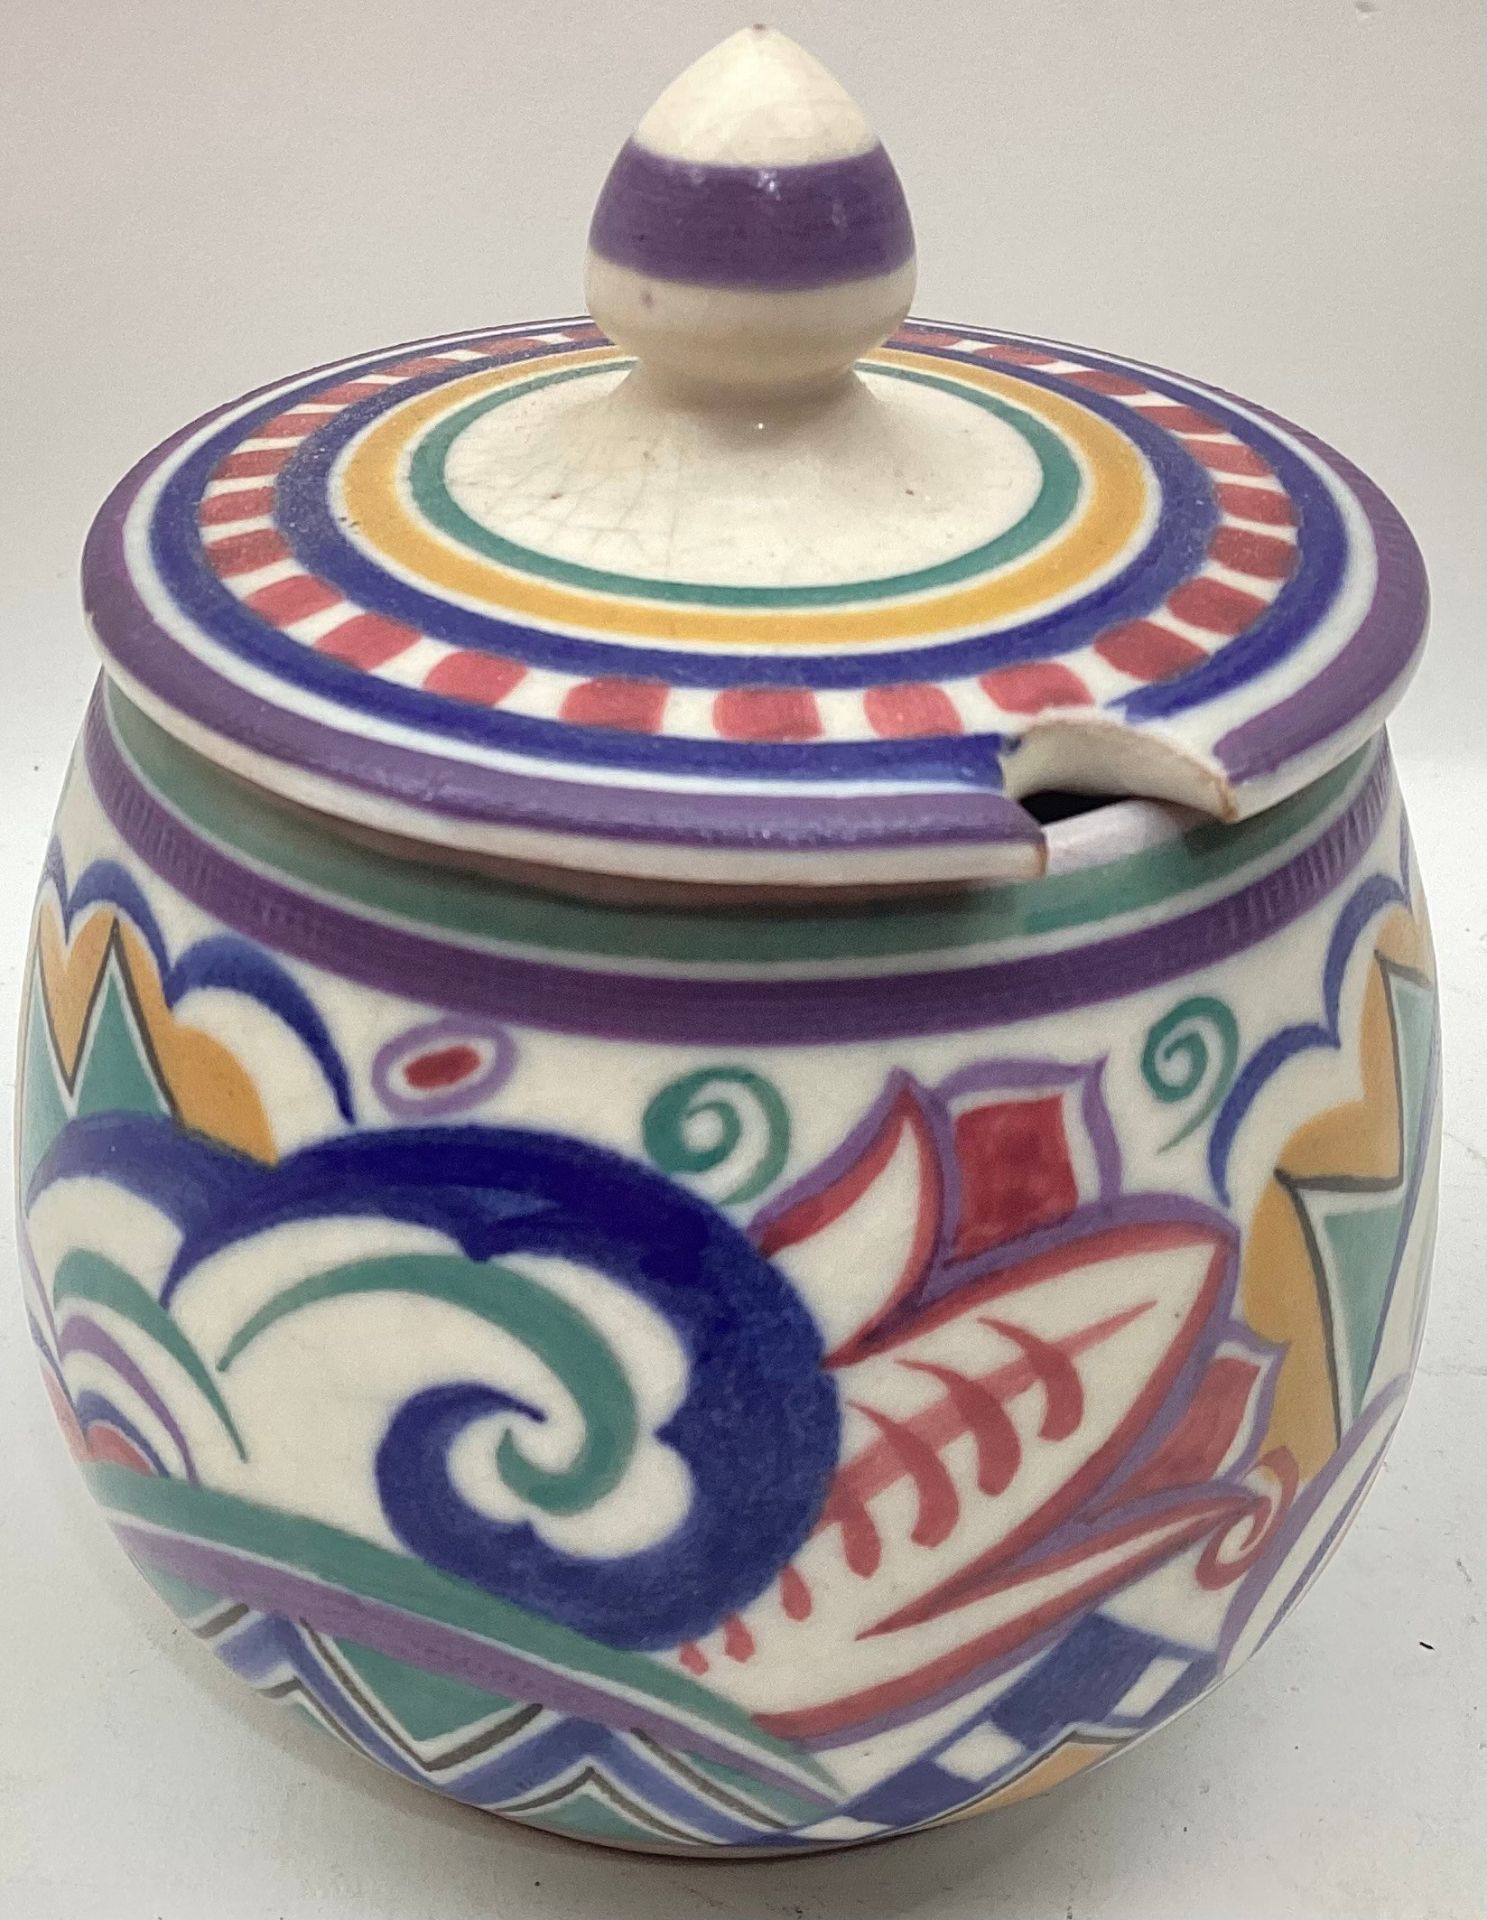 Poole Pottery Carter Stabler Adams BY pattern lidded Jam Pot with matching lid.